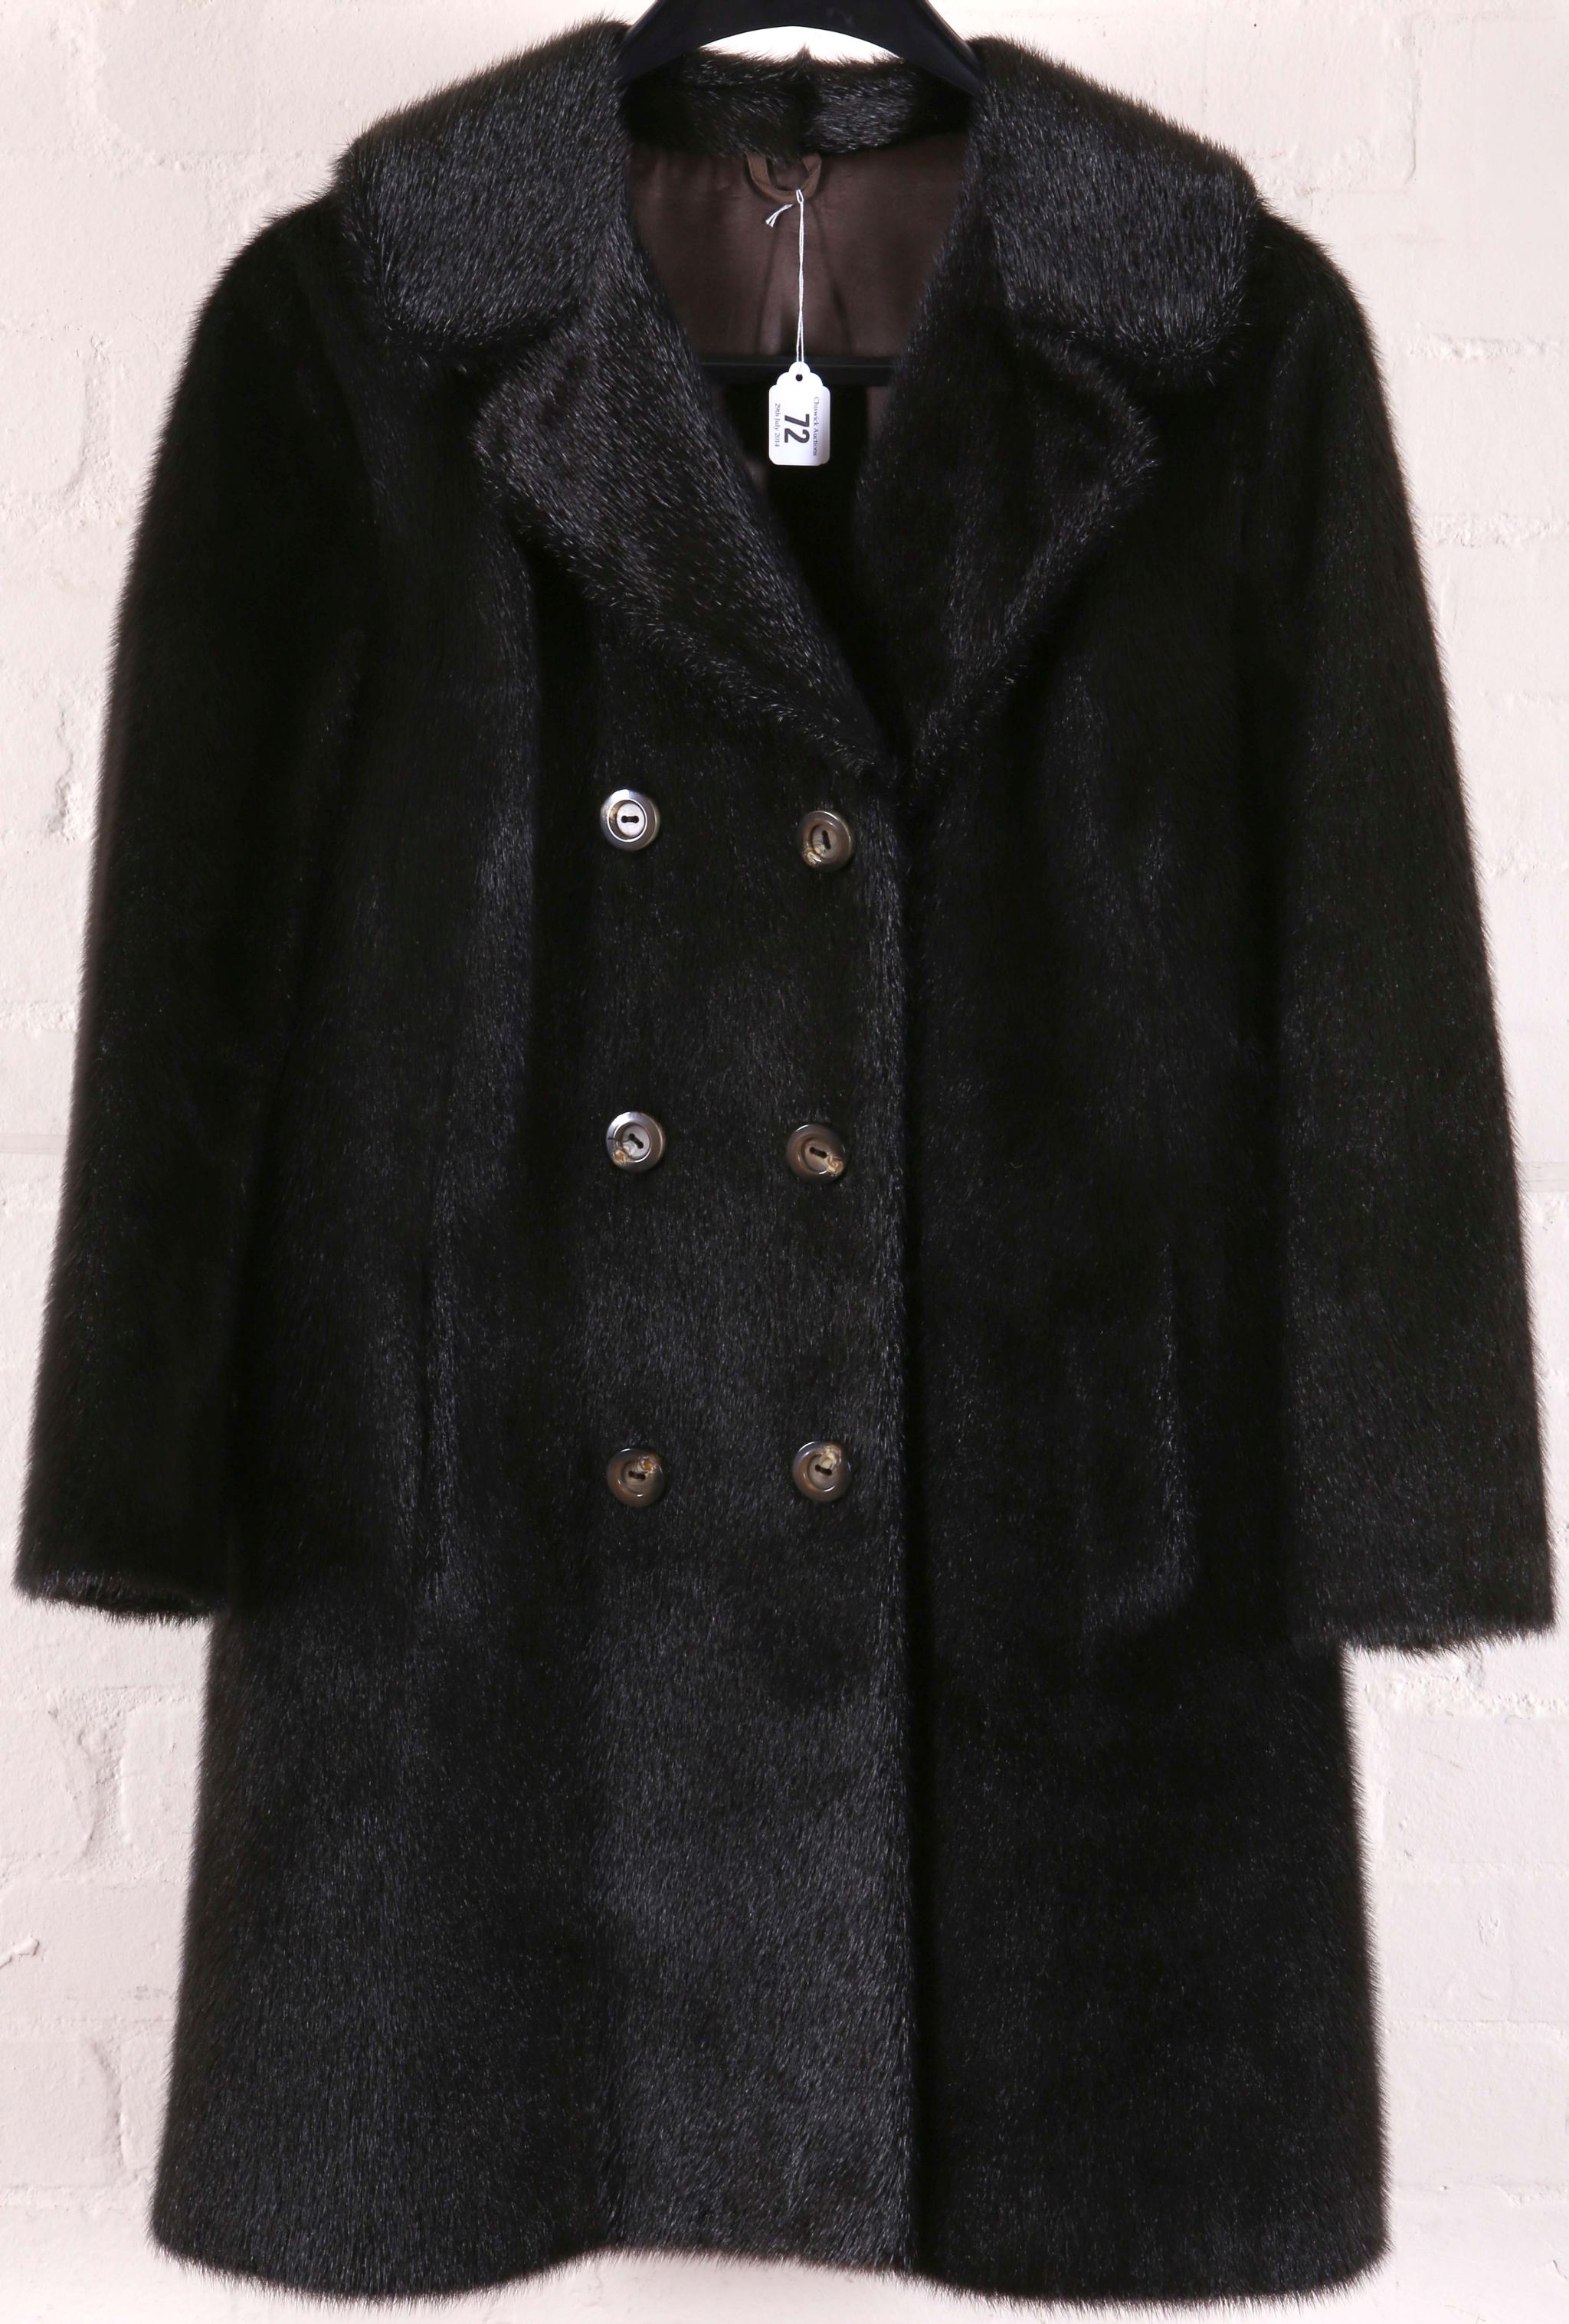 A vintage ladies black double breasted fur coat, with collar, eight buttons, side pockets, satin